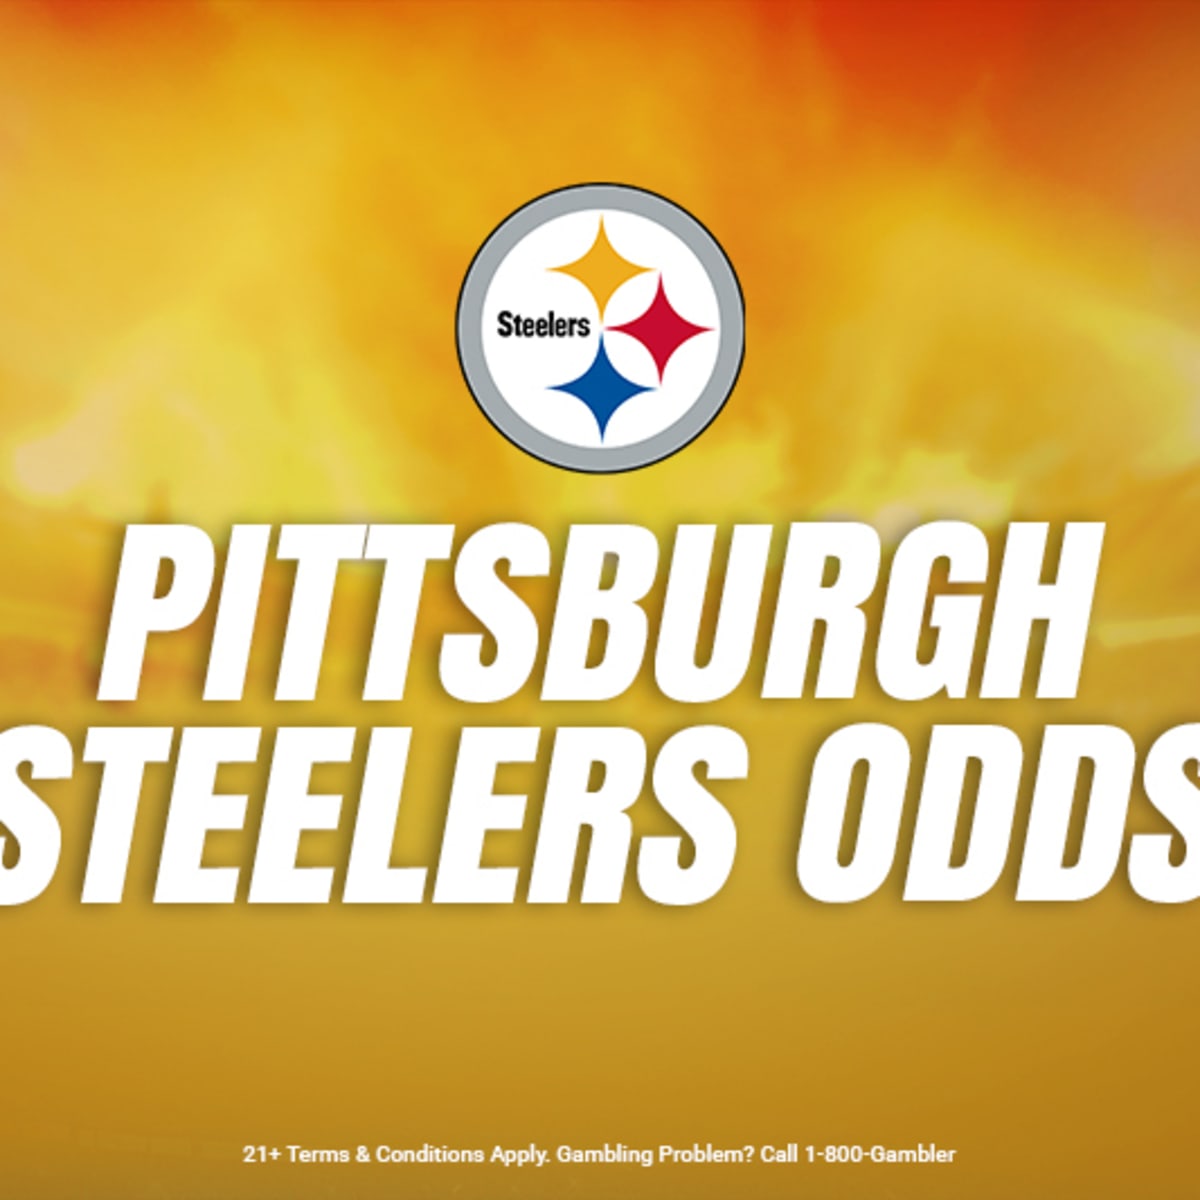 NFL betting: Steelers getting most of bets vs. Ravens